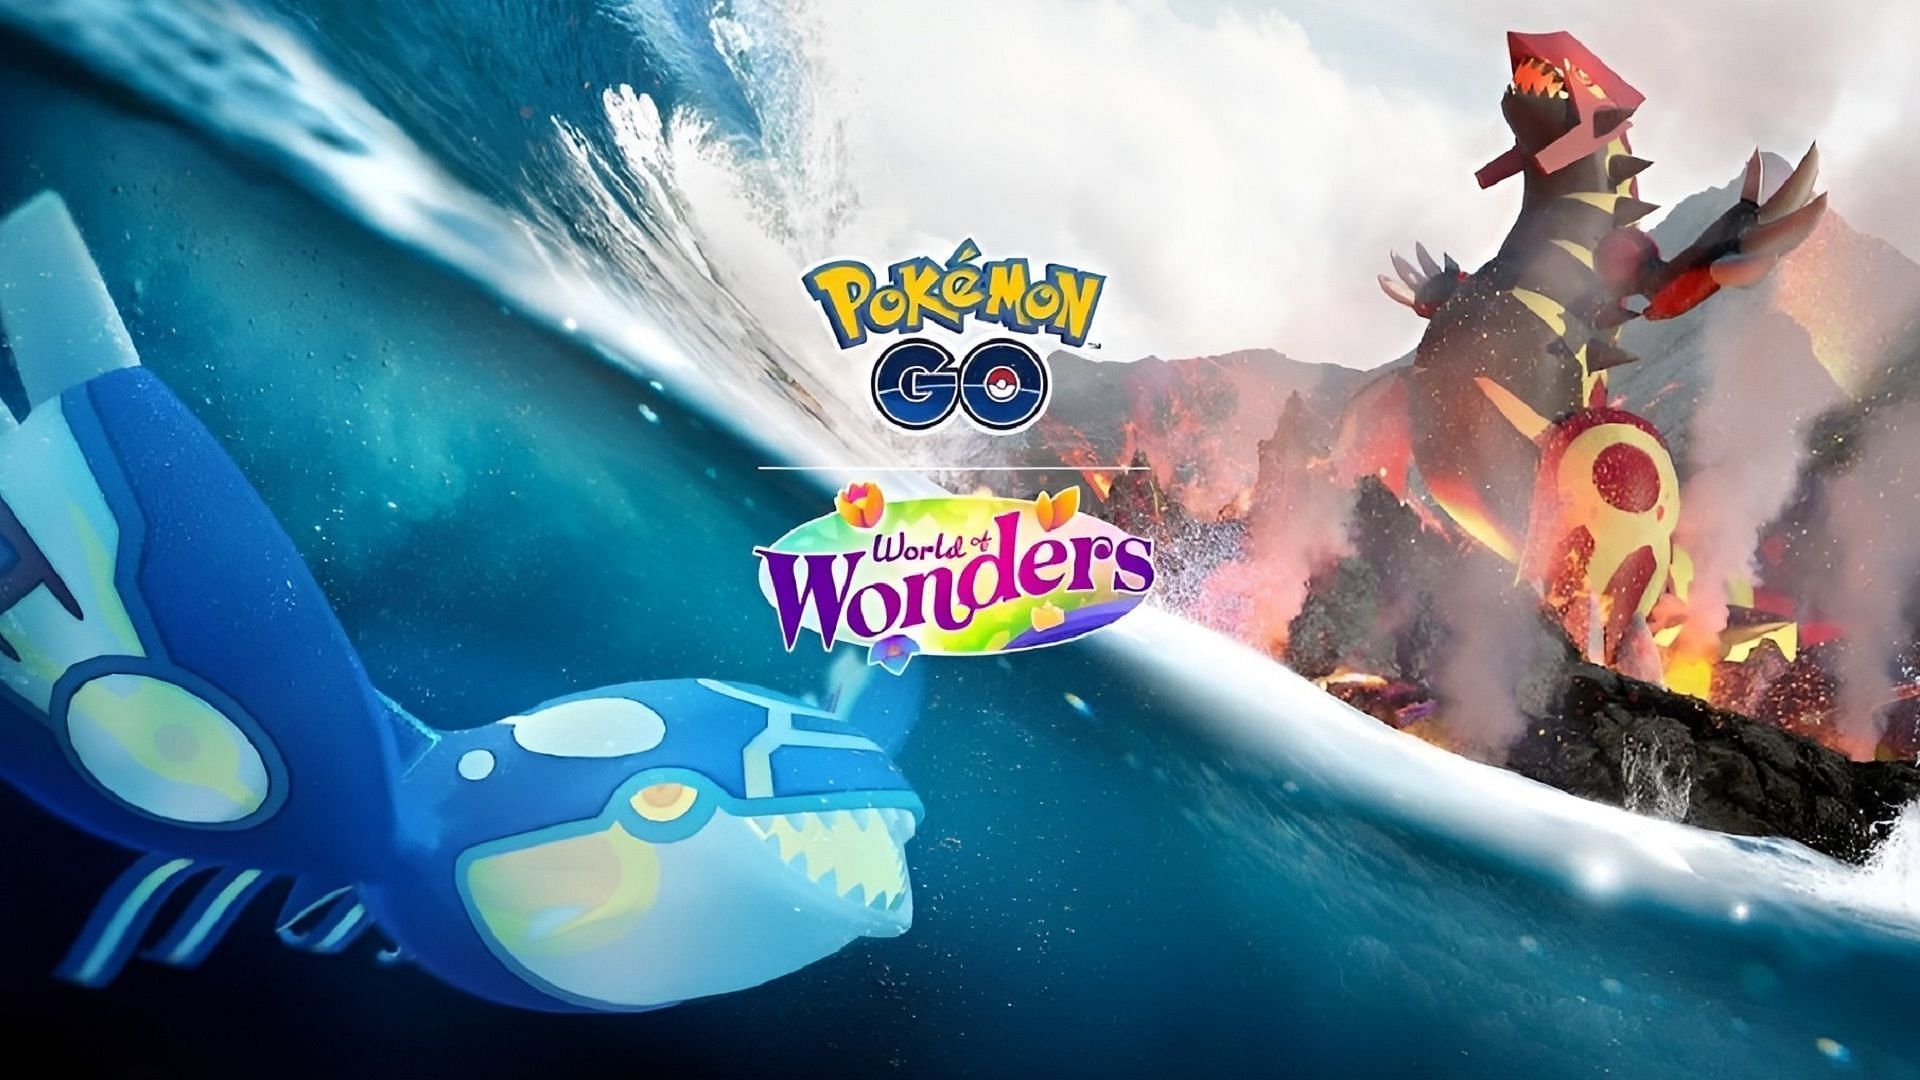 When are Primal Kyogre and Primal Groudon returning in Pokemon GO World of Wonders?